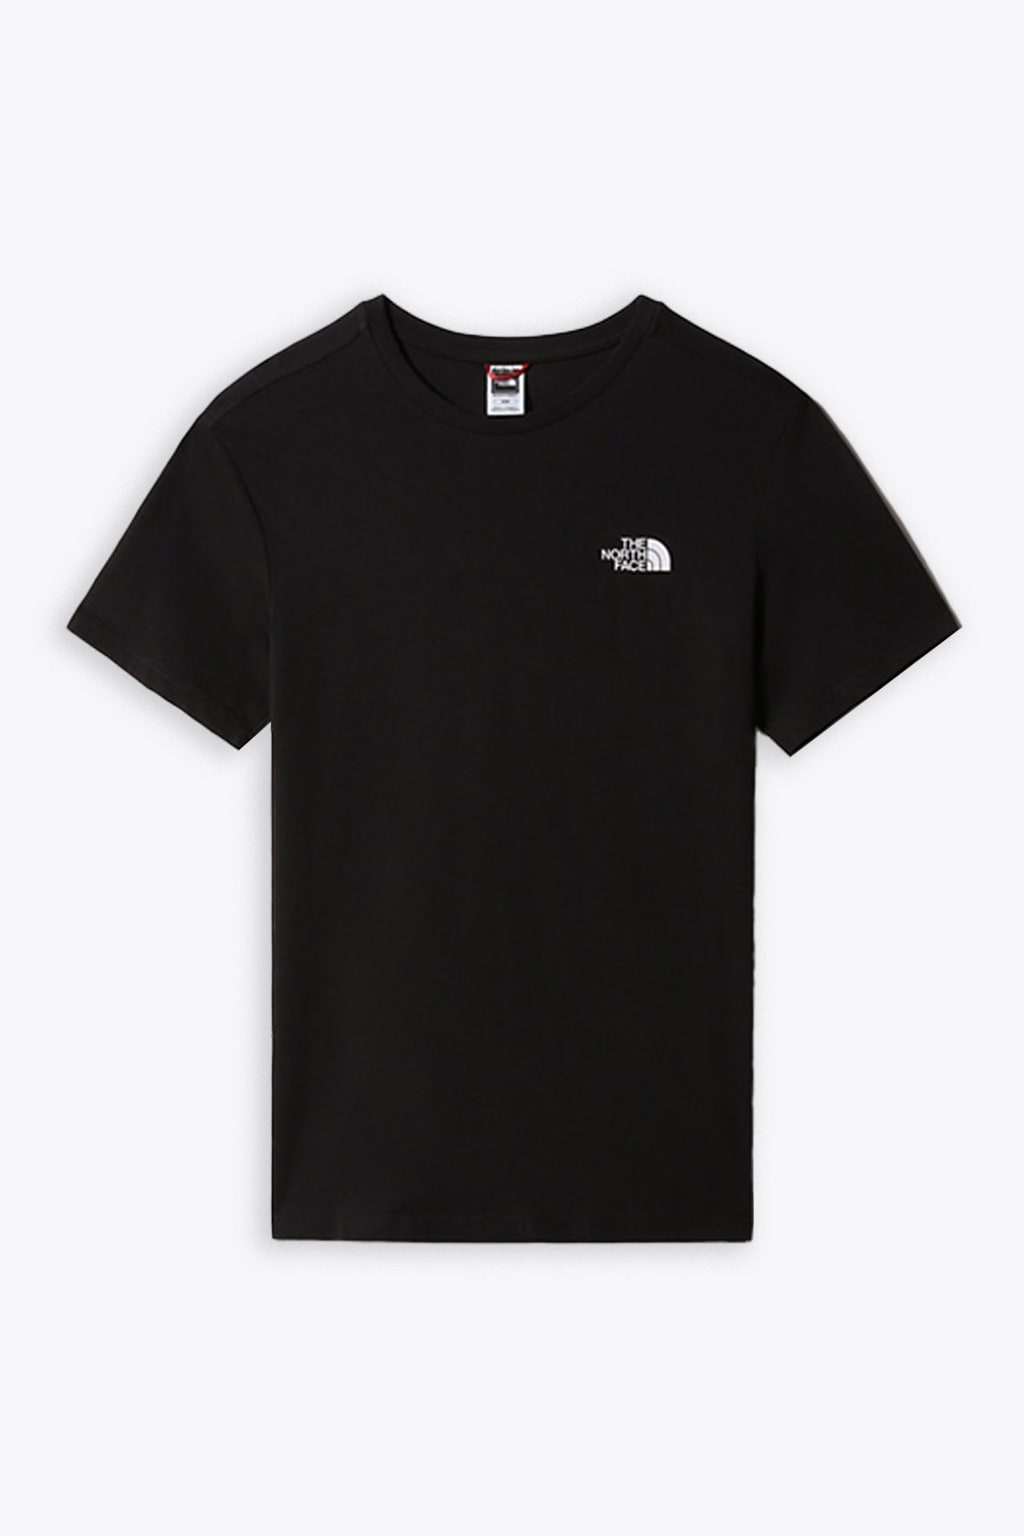 THE NORTH FACE MENS S/S SIMPLE DOME TEE - EU BLACK COTTON T-SHIRT WITH CHEST LOGO - SIMPLE DOME TEE